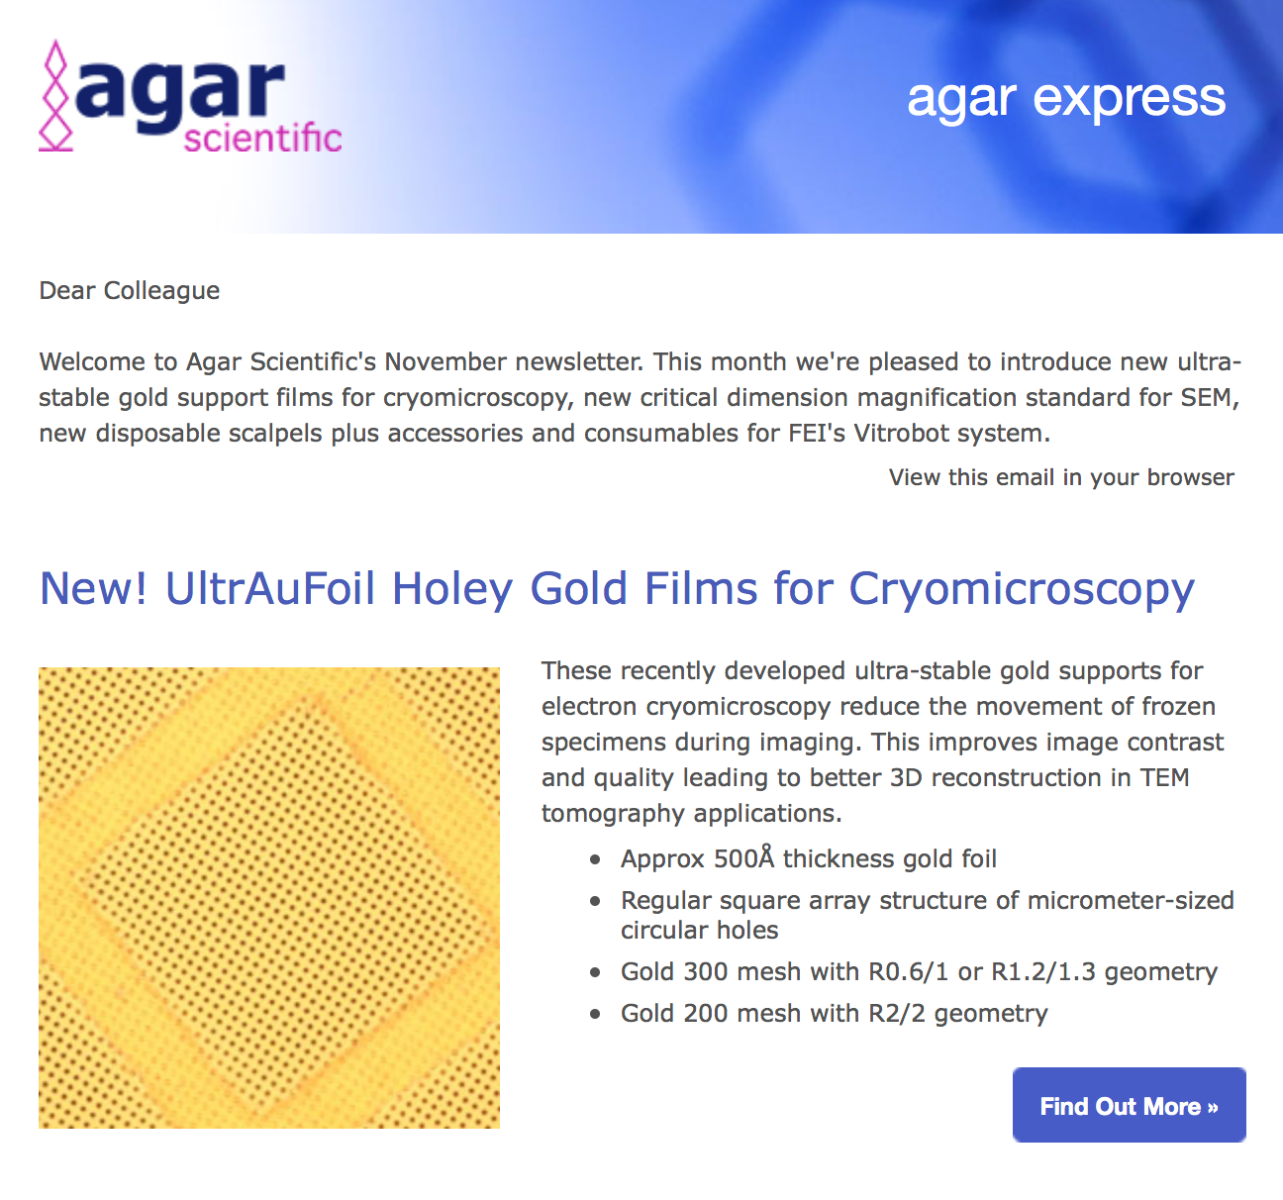 Agar Express November 2017 - UltrAuFoil Holey Gold Films for Cryomicroscopy, Critical Dimension Magnification Standards for SEM & more